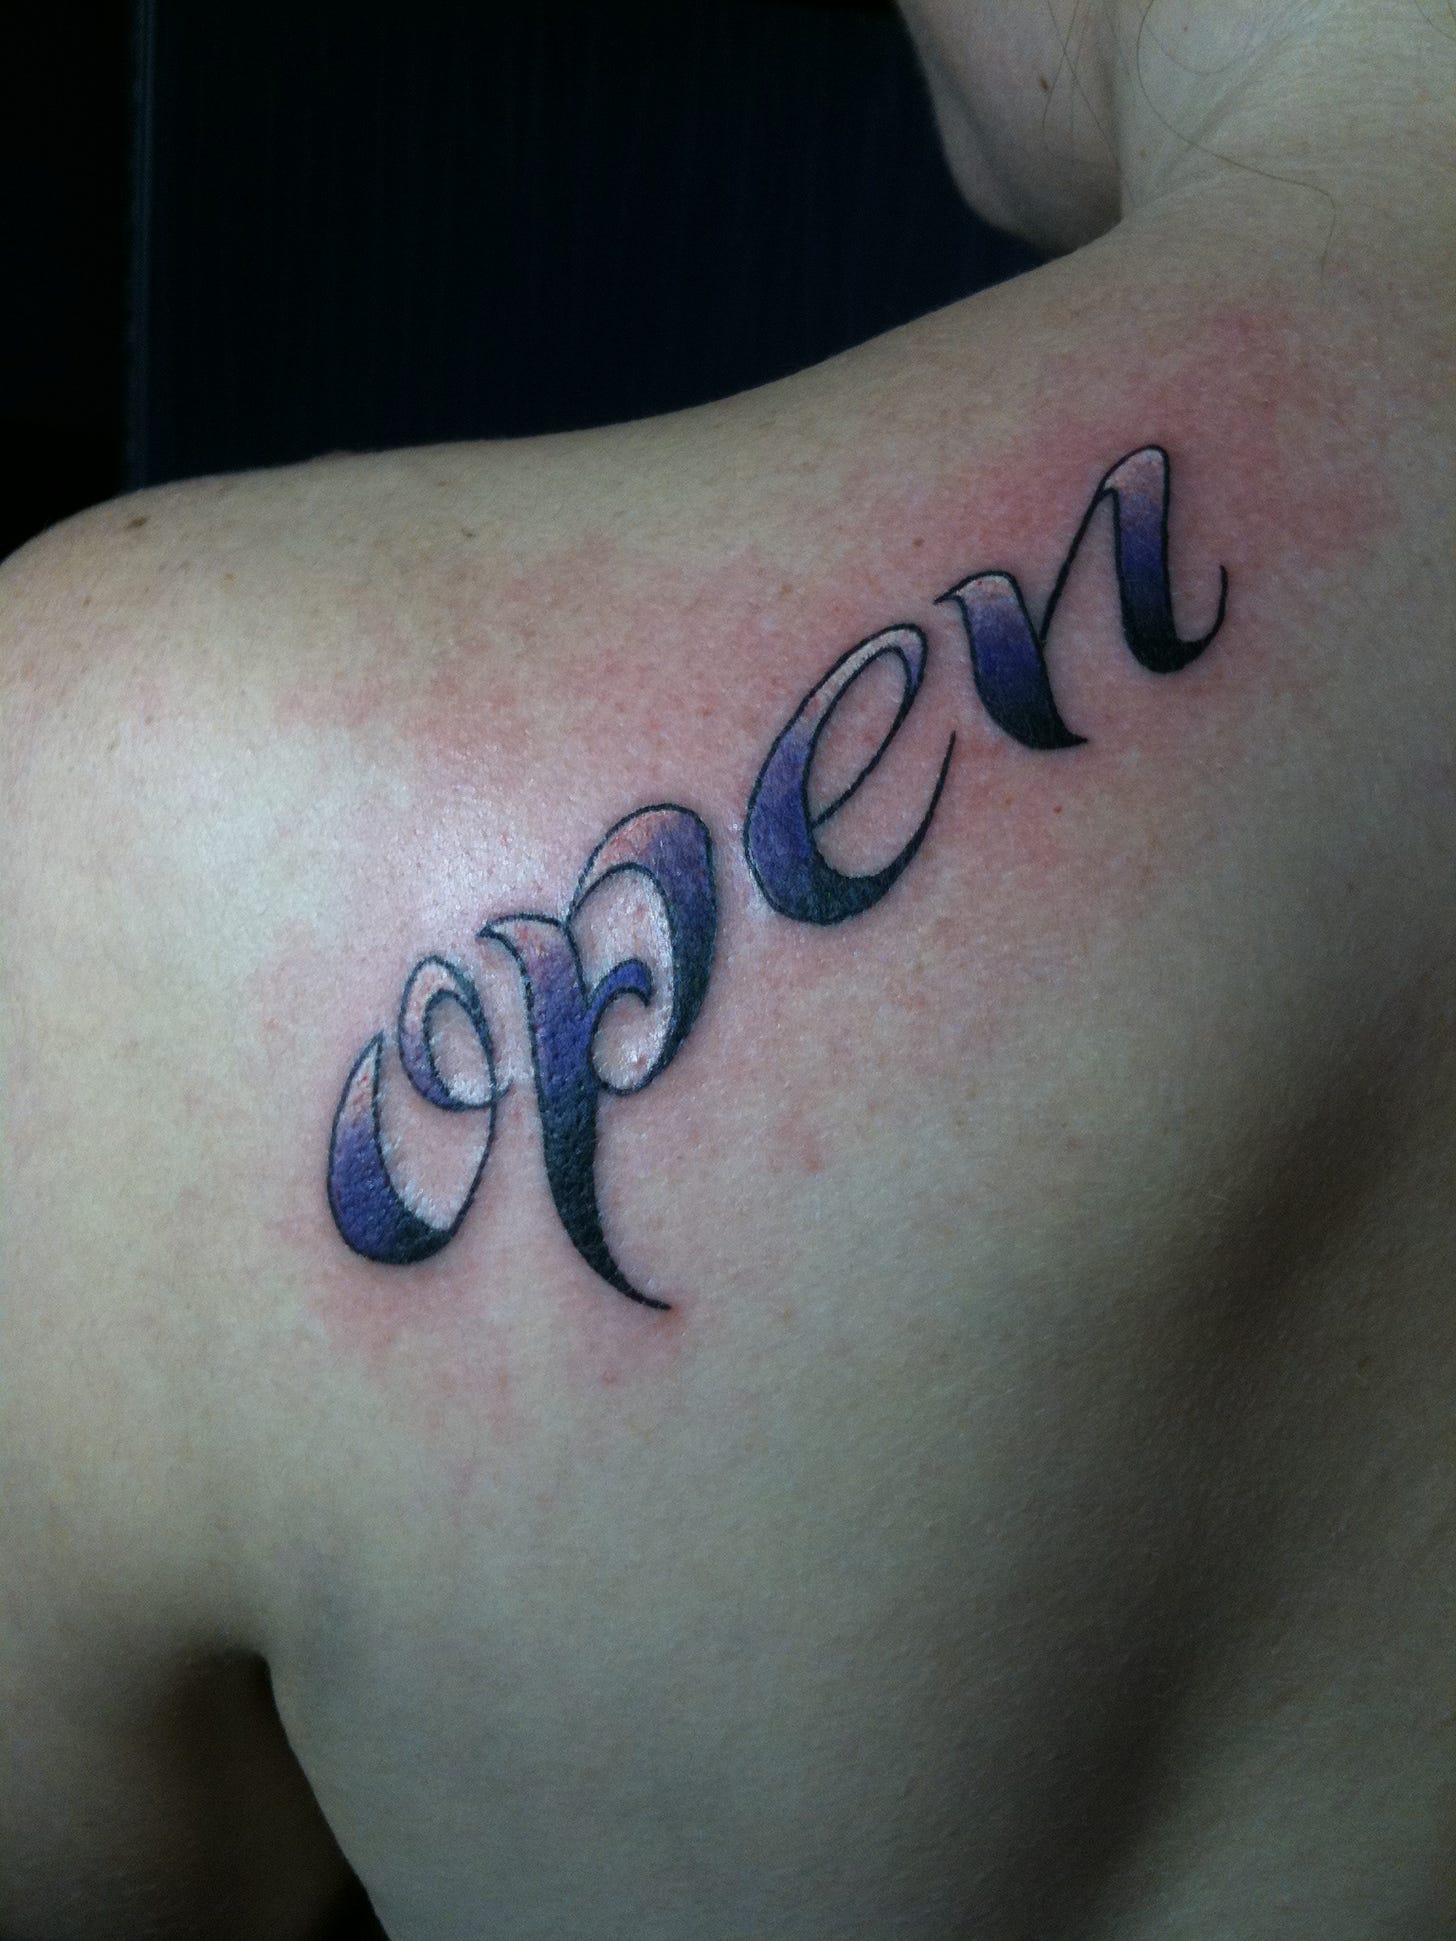 fresh tattoo on back that says "open"